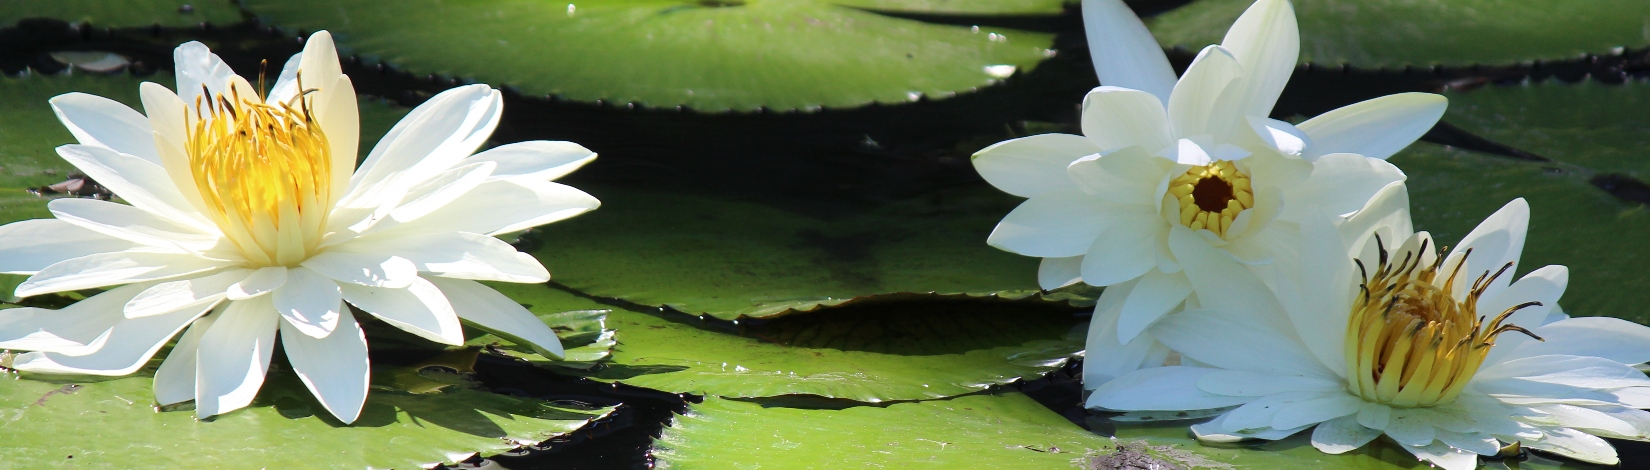 White waterlilies in a pond.    